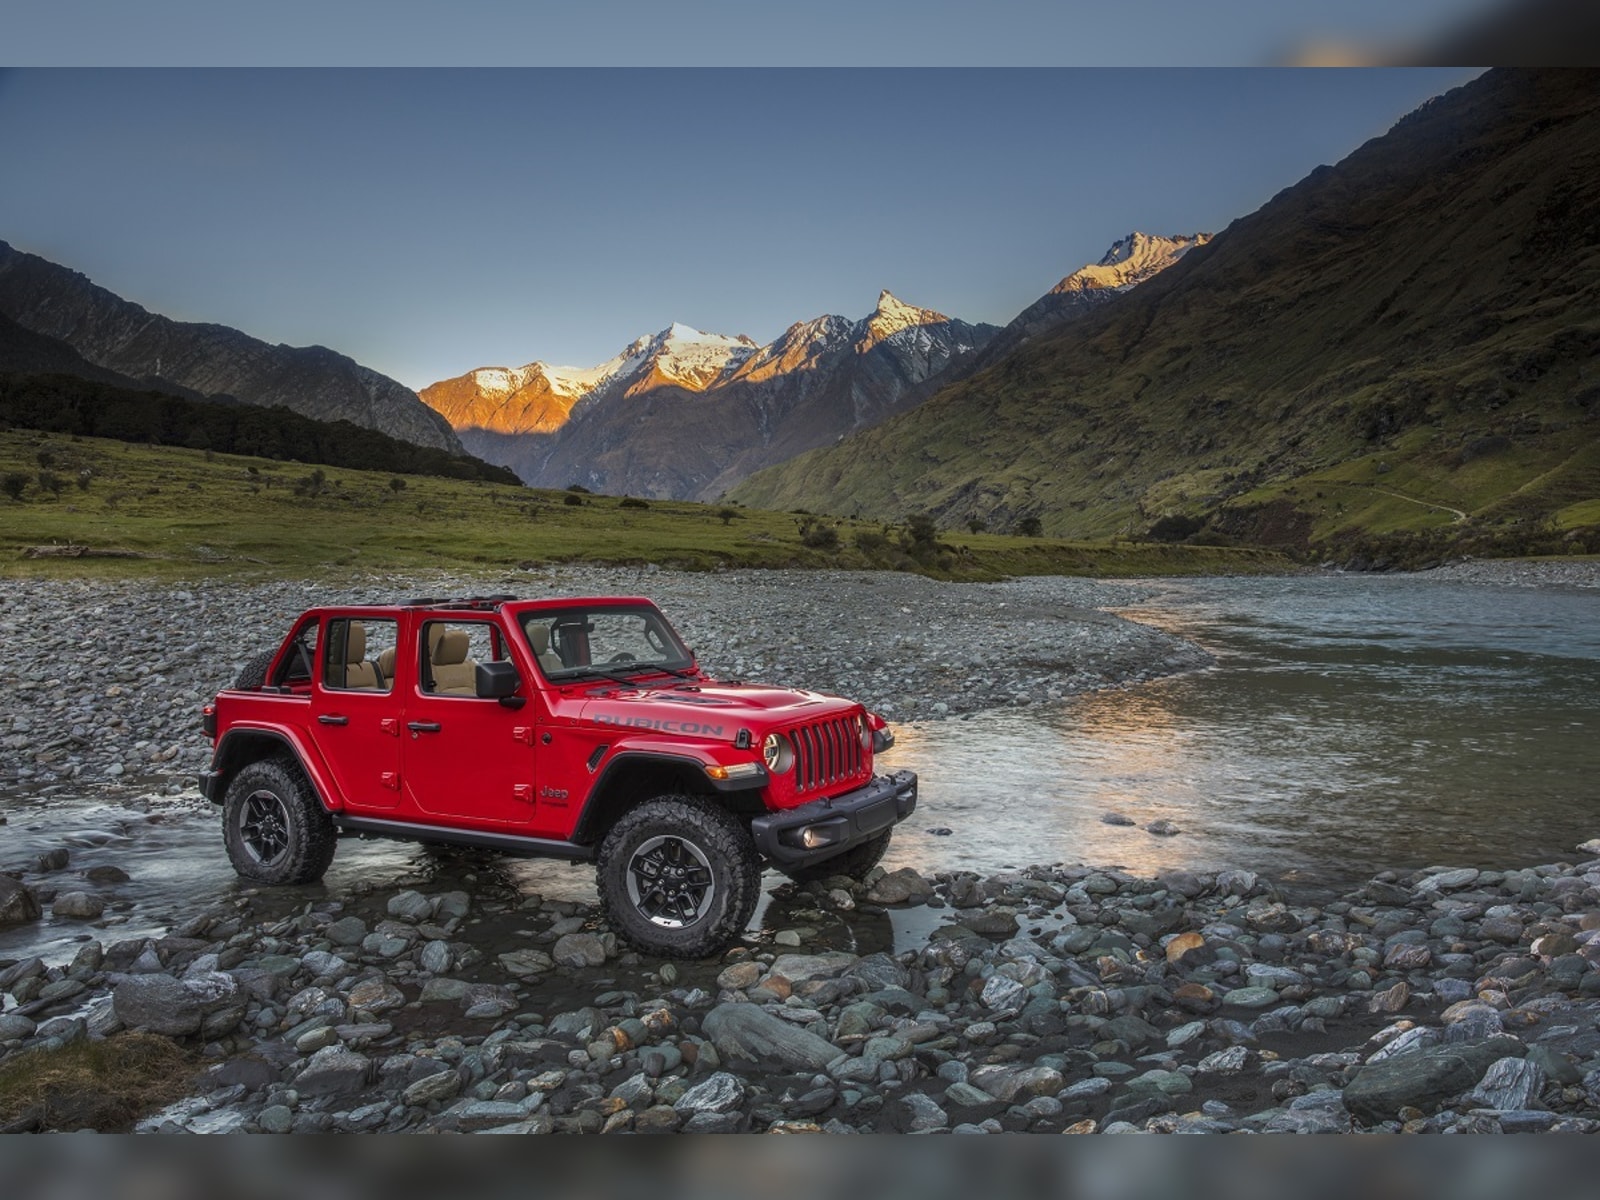 Jeep India Recalls 39 Units of Imported Wrangler SUVs Over Faulty Fuel Line  Connector